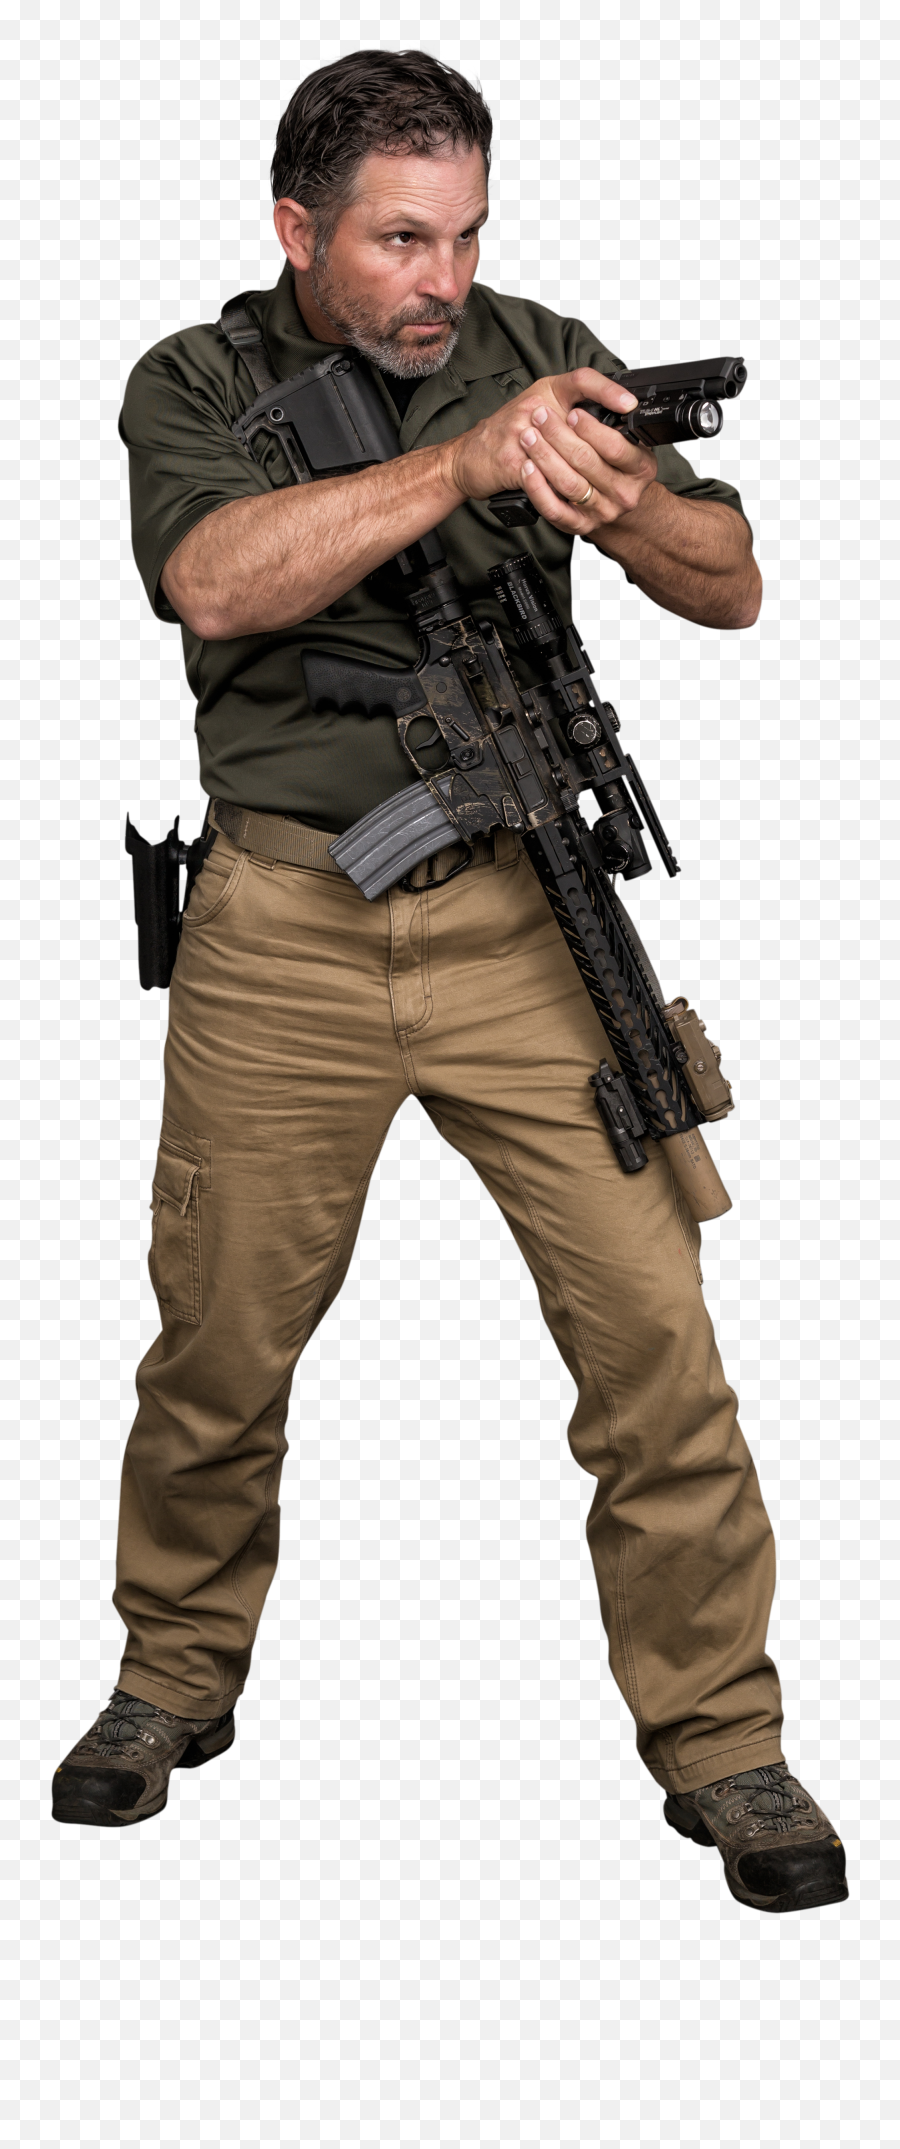 Guy With Gun Png Images Collection For - Man With Gun Png,Rifle Png